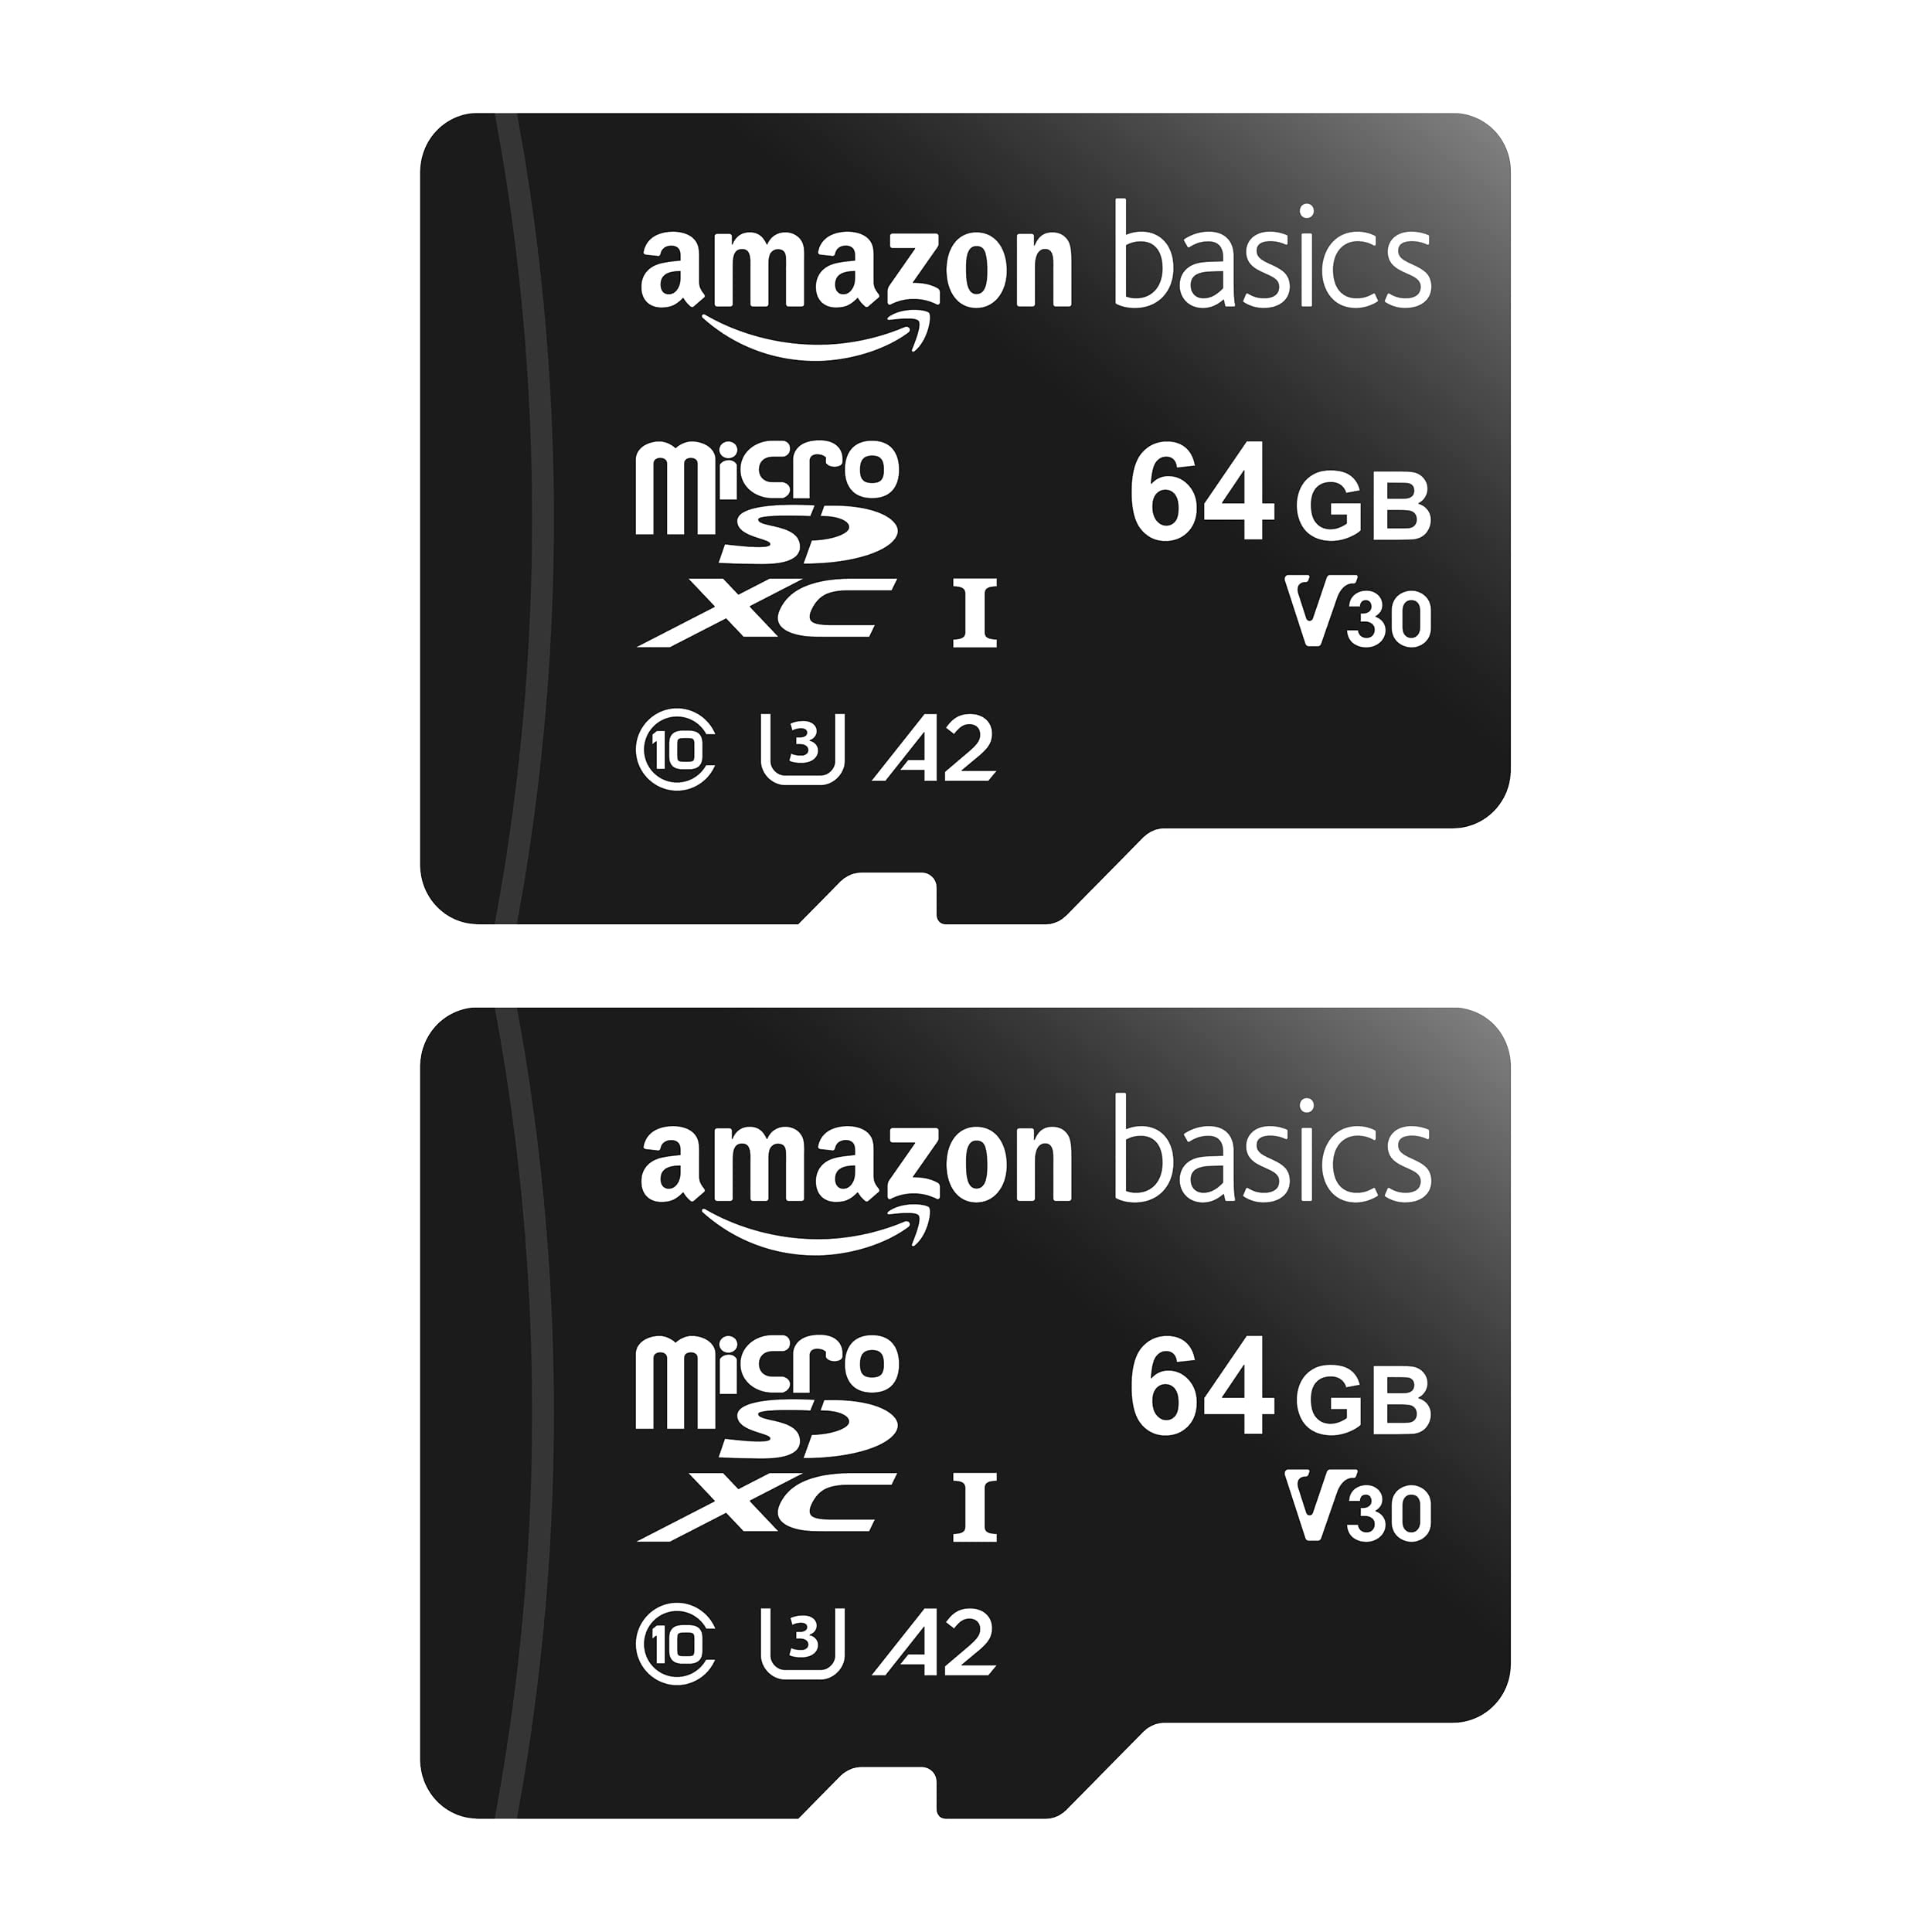 Amazon Basics microSDXC Memory Card with Full Size Adapter, A2, U3, Read Speed up to 100 MB/s, 64 GB, Pack of 2, Black